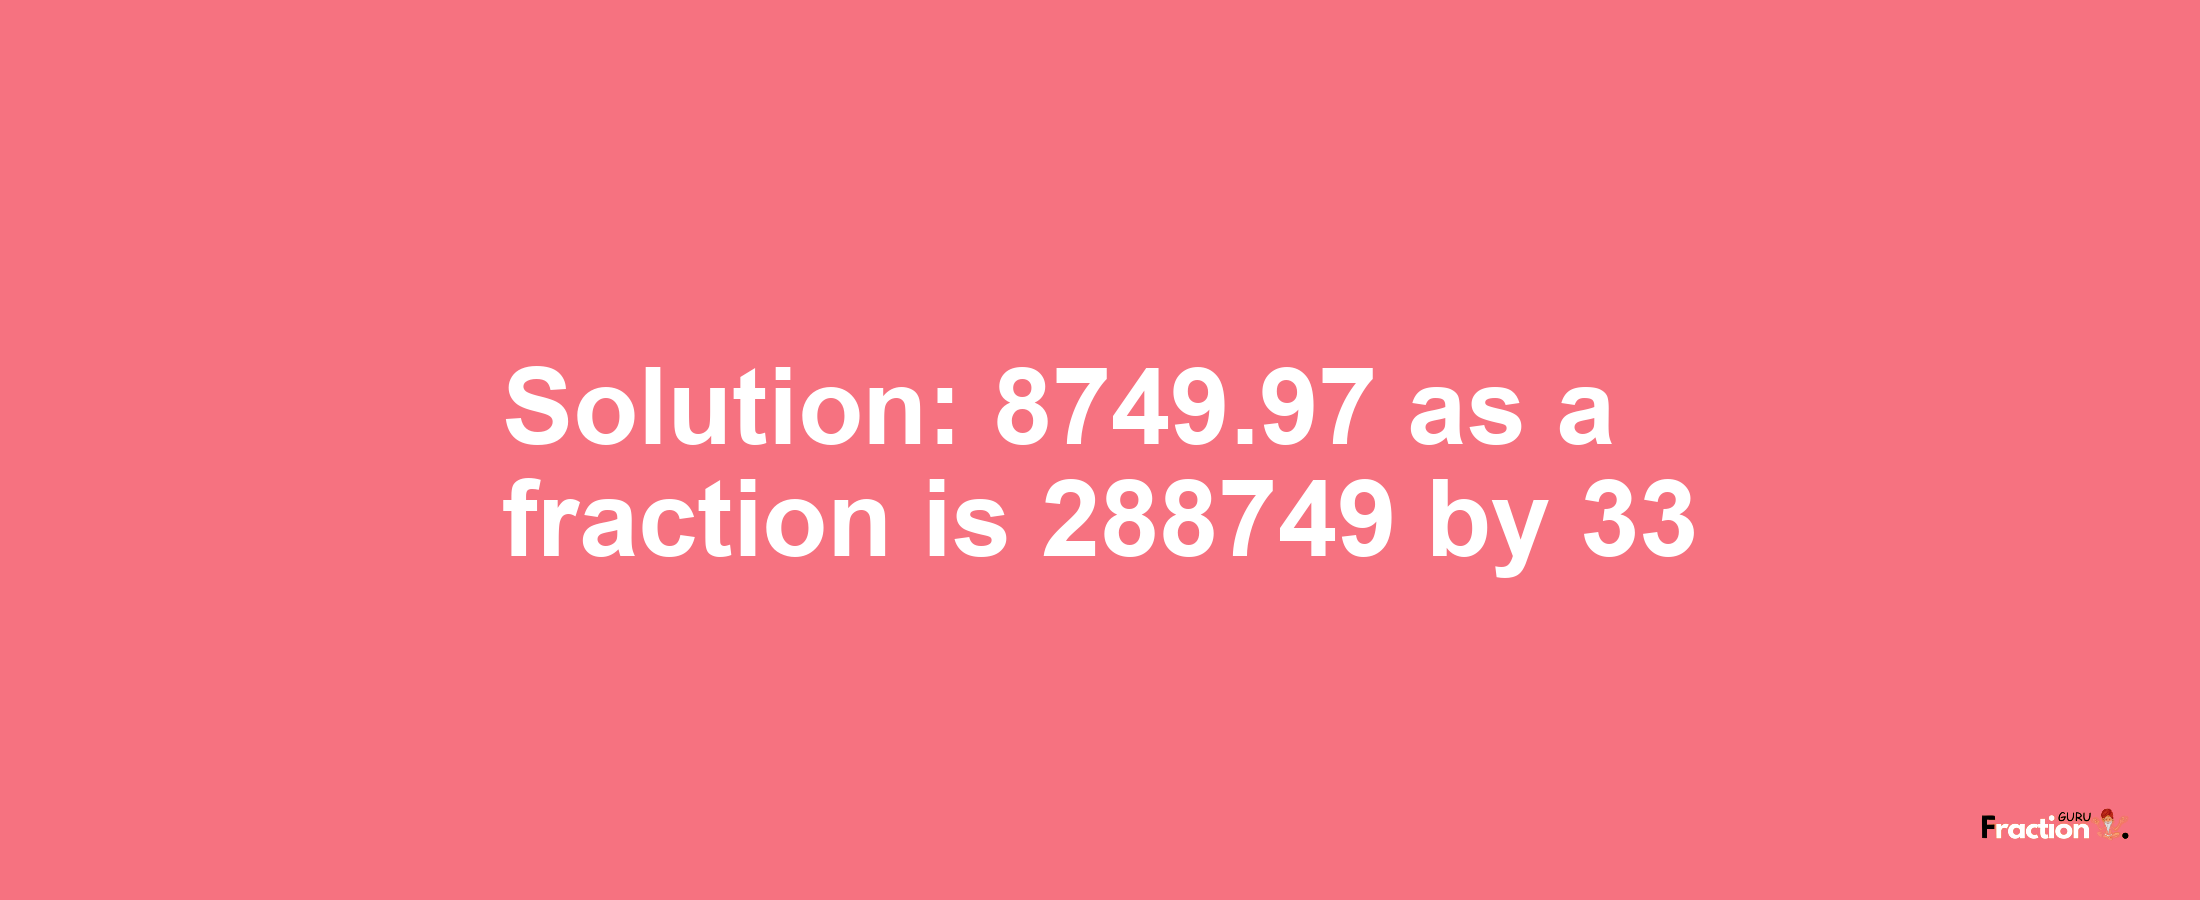 Solution:8749.97 as a fraction is 288749/33